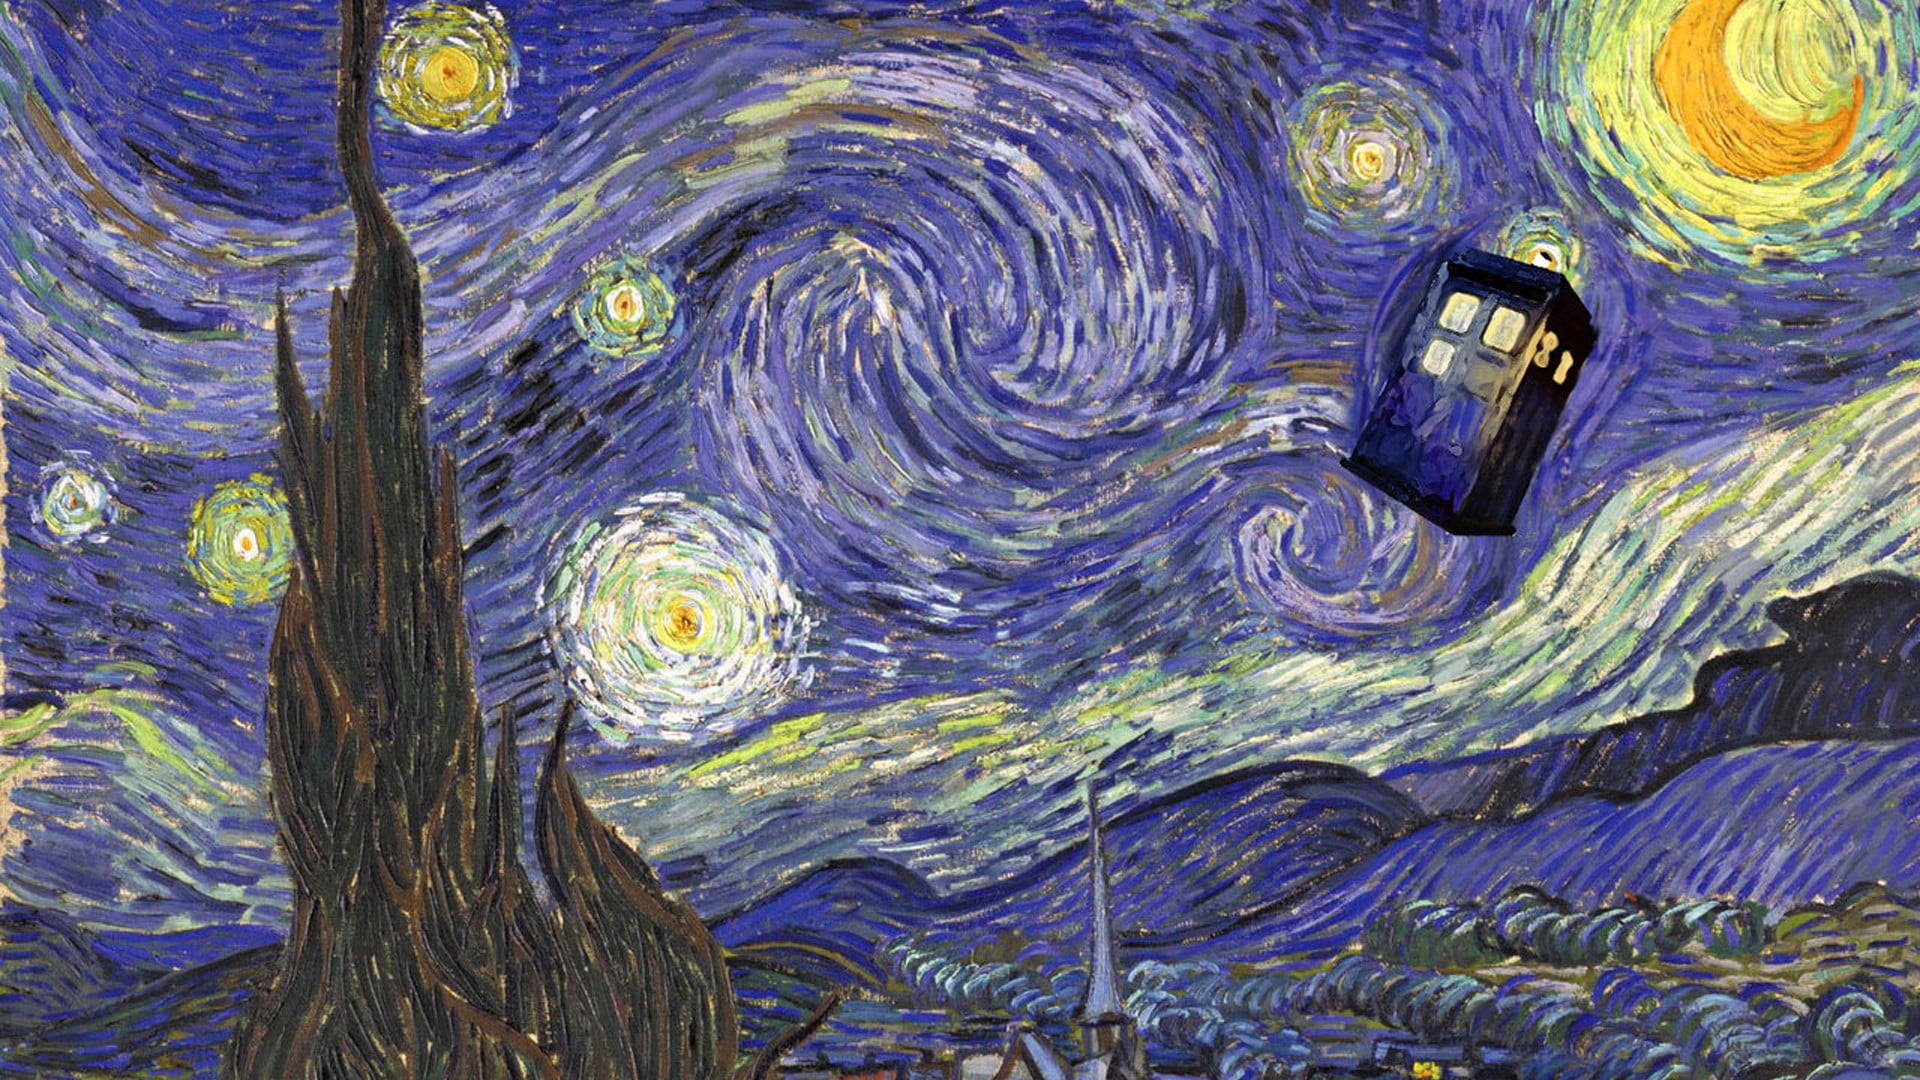 Starry Night by Vincent Van Gogh, Doctor Who, TARDIS, abstract